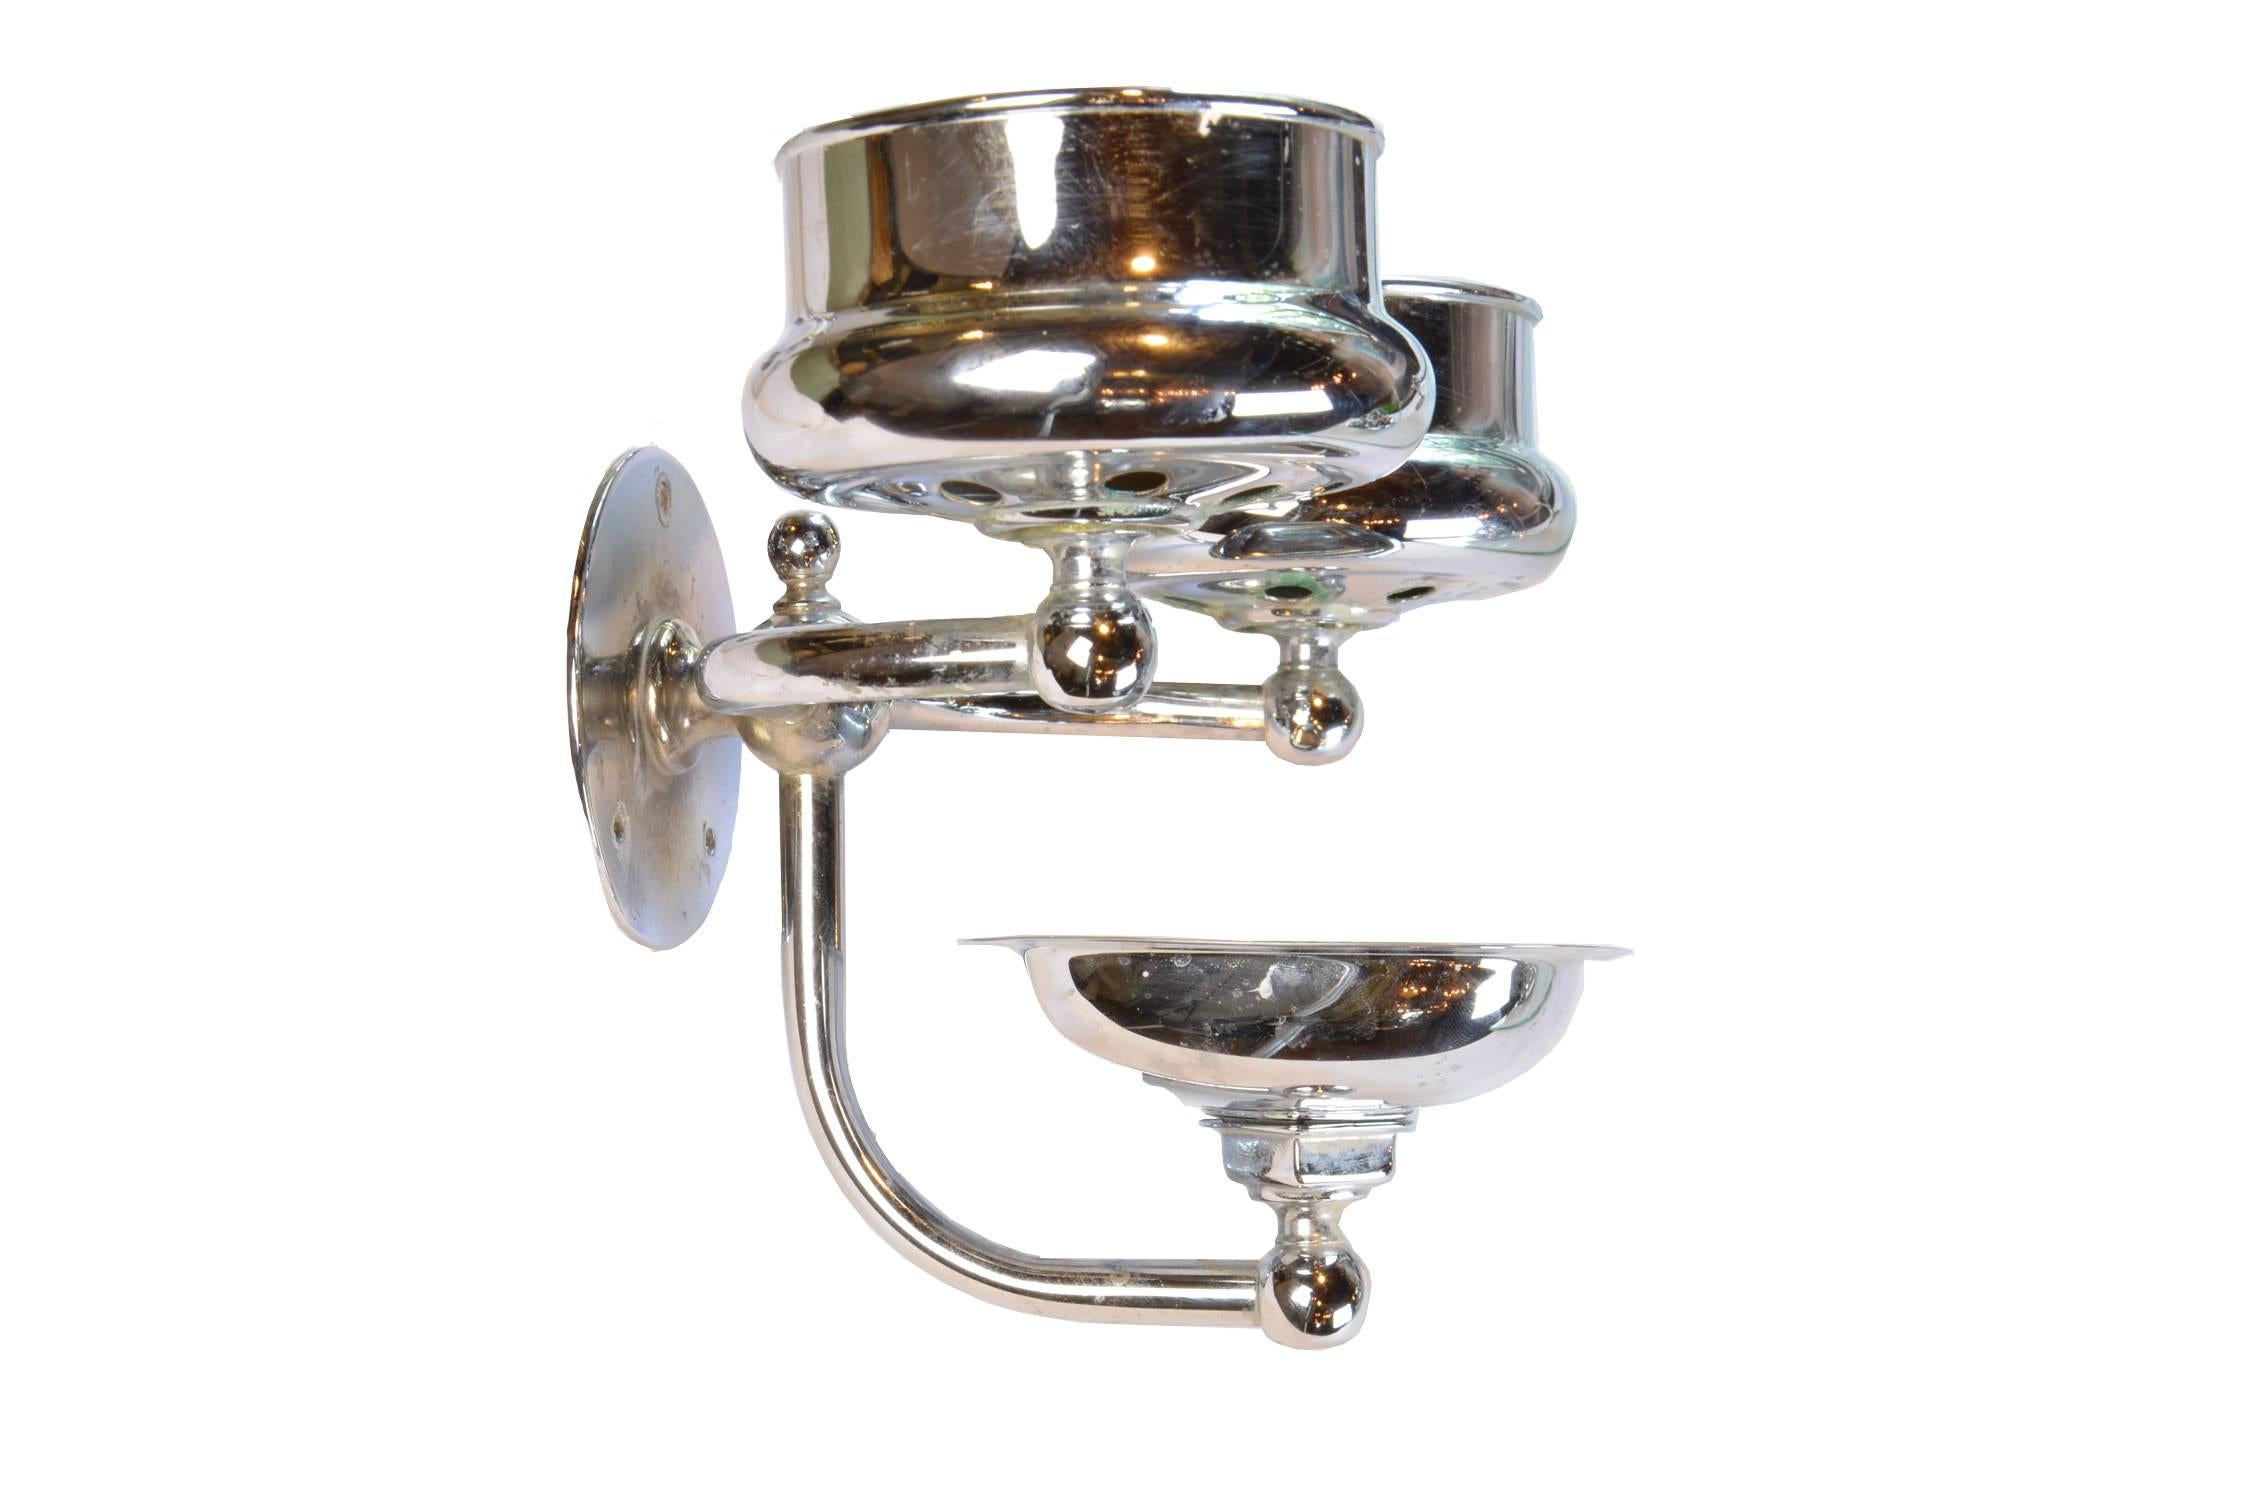 American Early 20th Century Nickel-Plated Soap Dish and Cup Holder